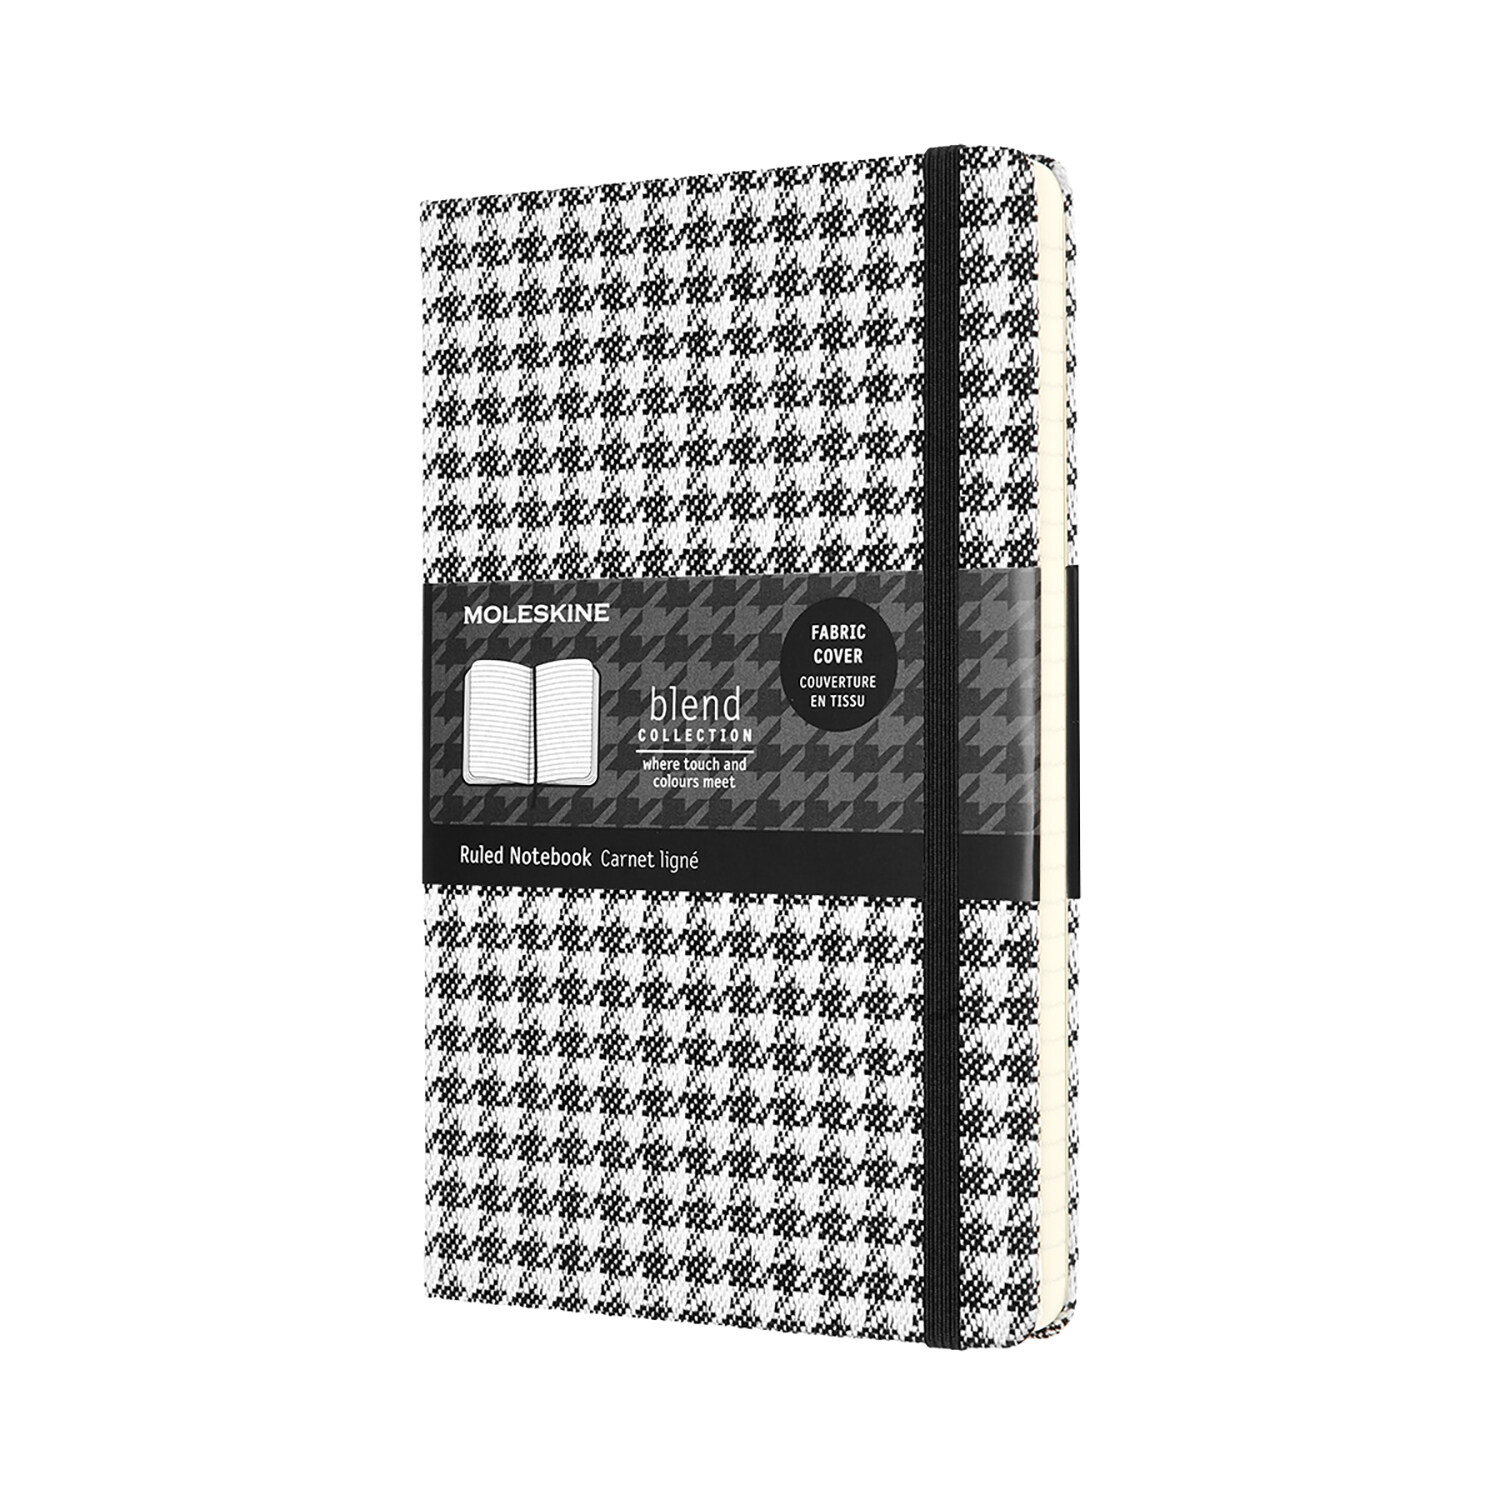 Moleskine Limited Collection Notebook, Blend, Large, Ruled, Wide Pattern, Hard Cover (5 X 8.25) (Hardcover)